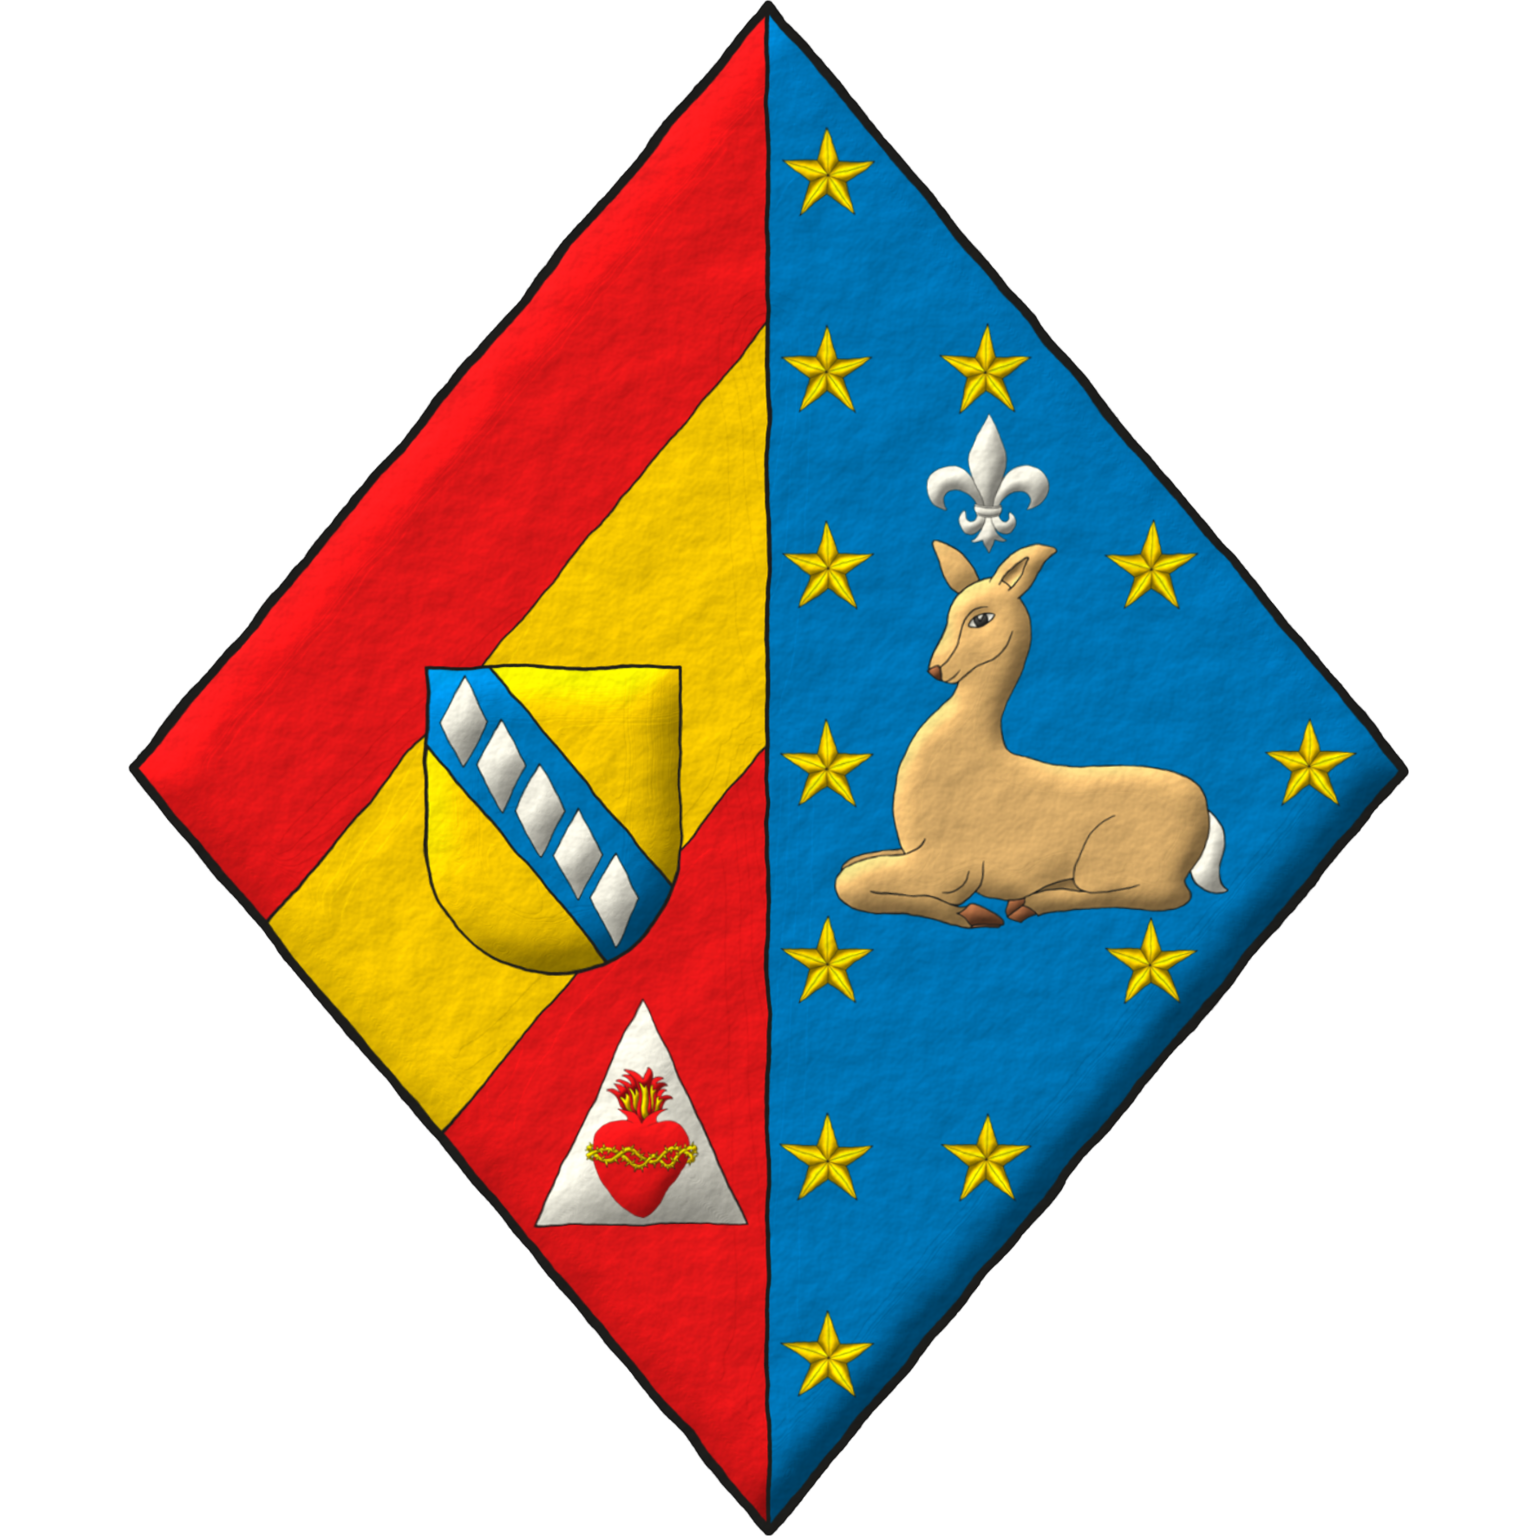 Party per pale: 1 Gules, a bend sinister debruised by an inescutcheon Or charged with a bend Azure charged with five fusils palewise Argent, in base on a triangle Argent the Sacred Heart of Jesus proper [for Adriaensen]; 2 Azure, a fleur de lis Argent above a doe sejeant proper surrounded by twelve mullets in orle Or [granted by Bourbon-Parma].